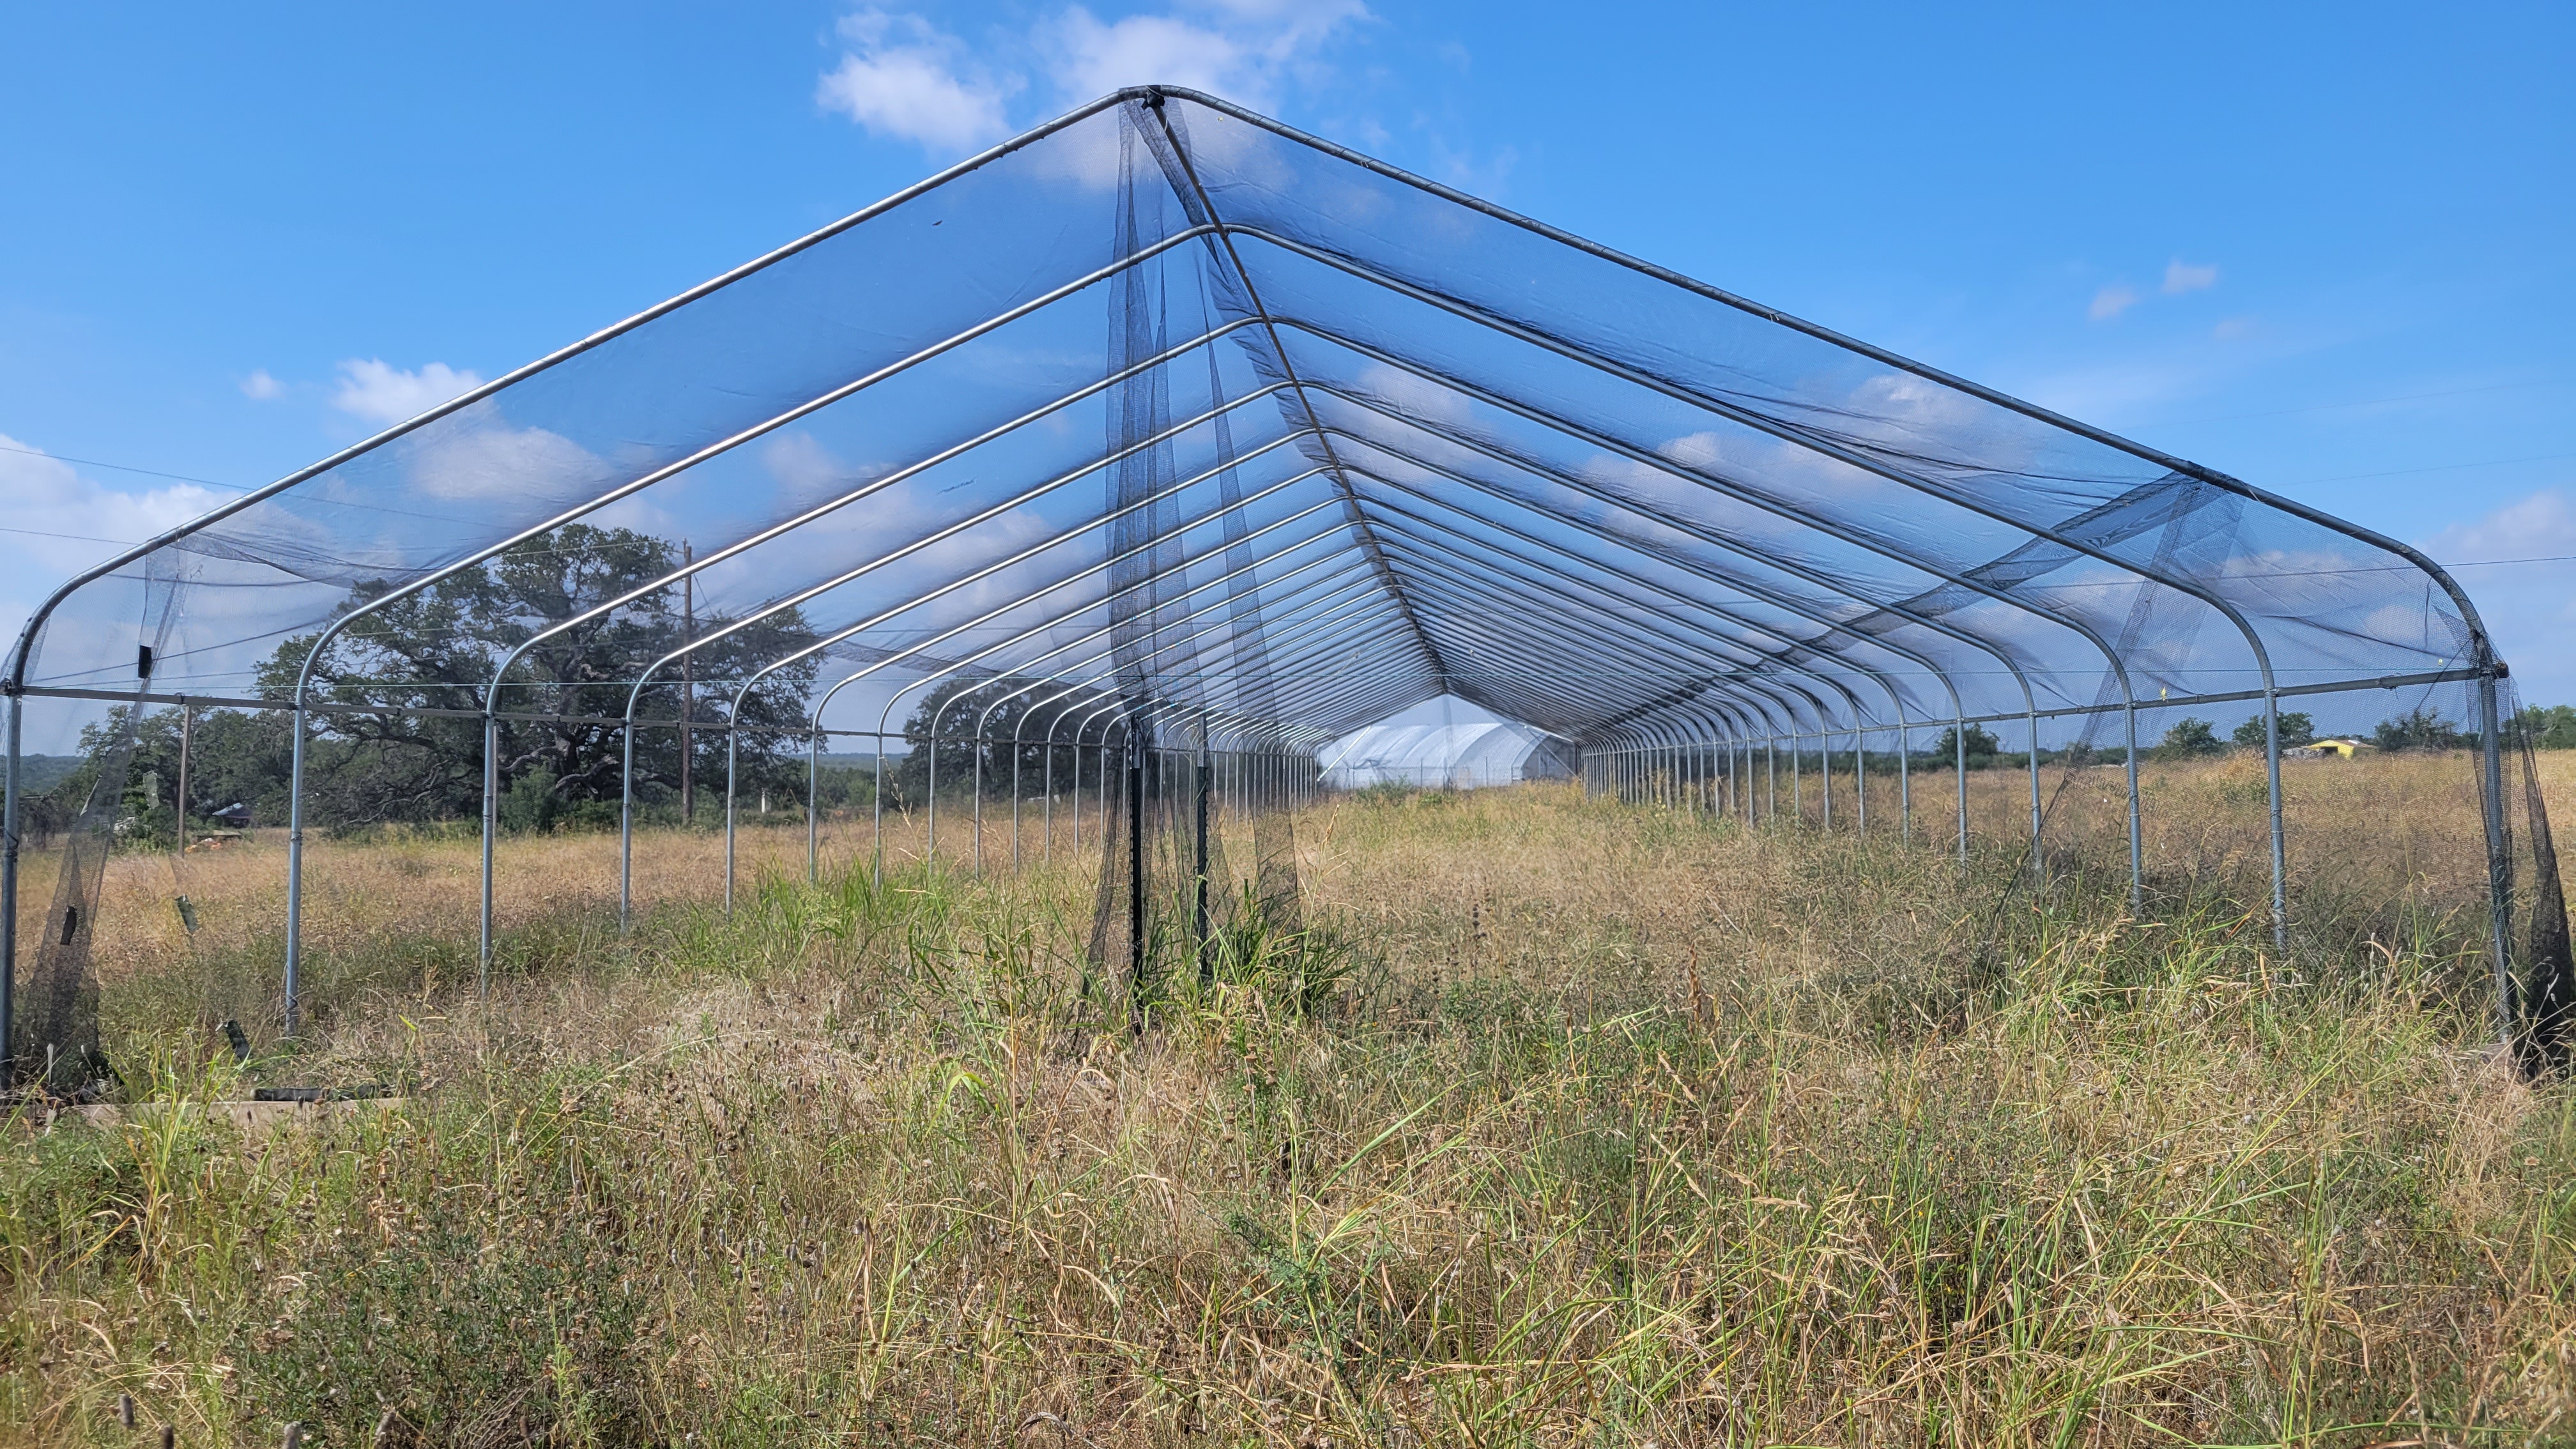 Image of the bat flight cage in a field. The cage is roughly 50 yards long, it has a triangular roof, and the metal structure is surrounded by netting.